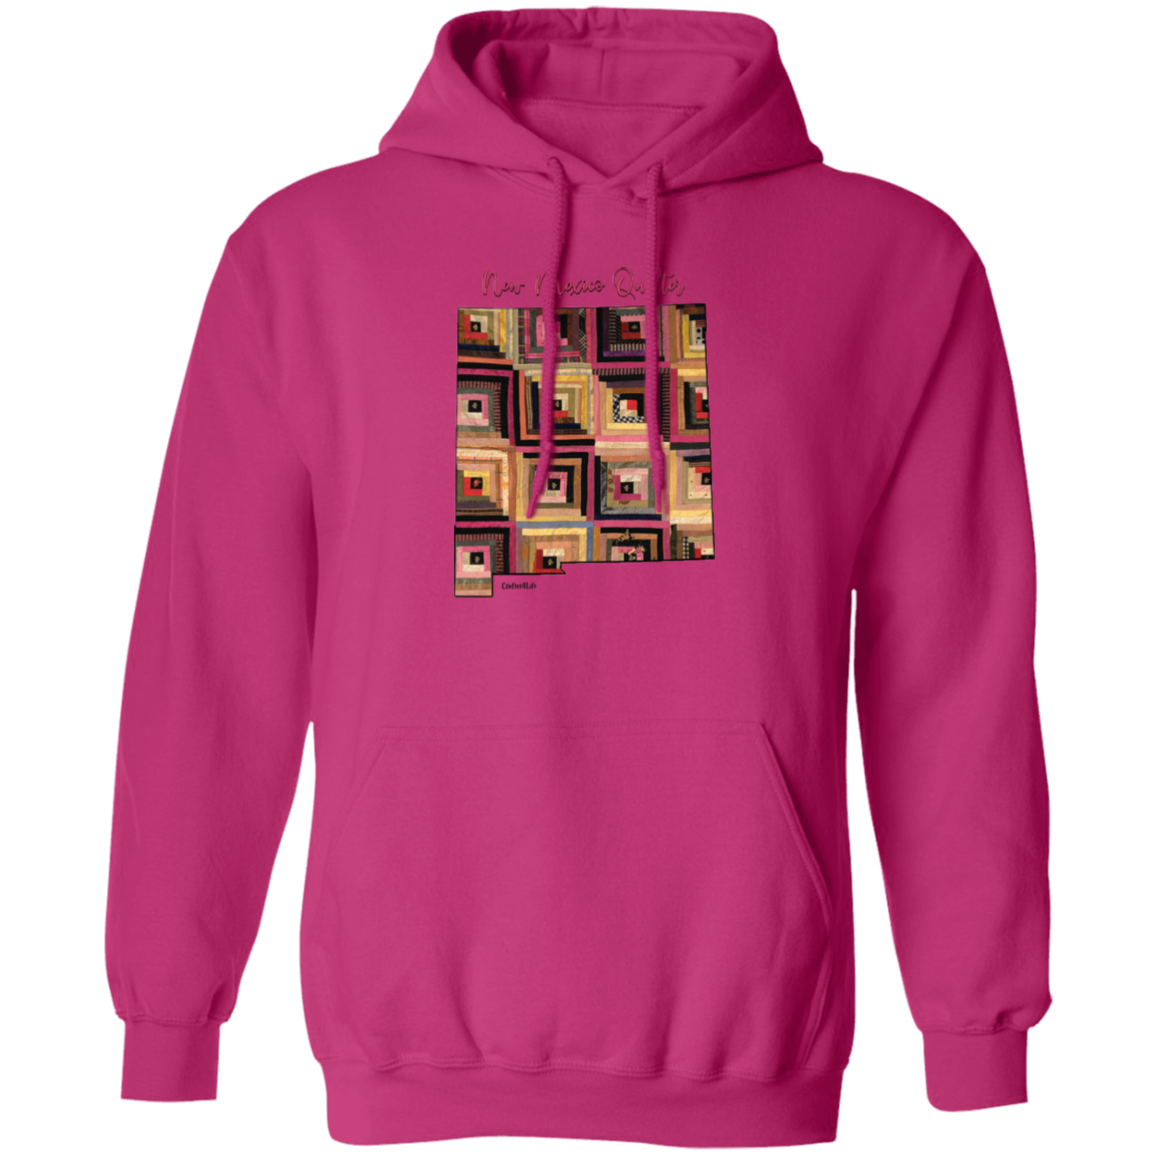 New Mexico Quilter Pullover Hoodie, Gift for Quilting Friends and Family